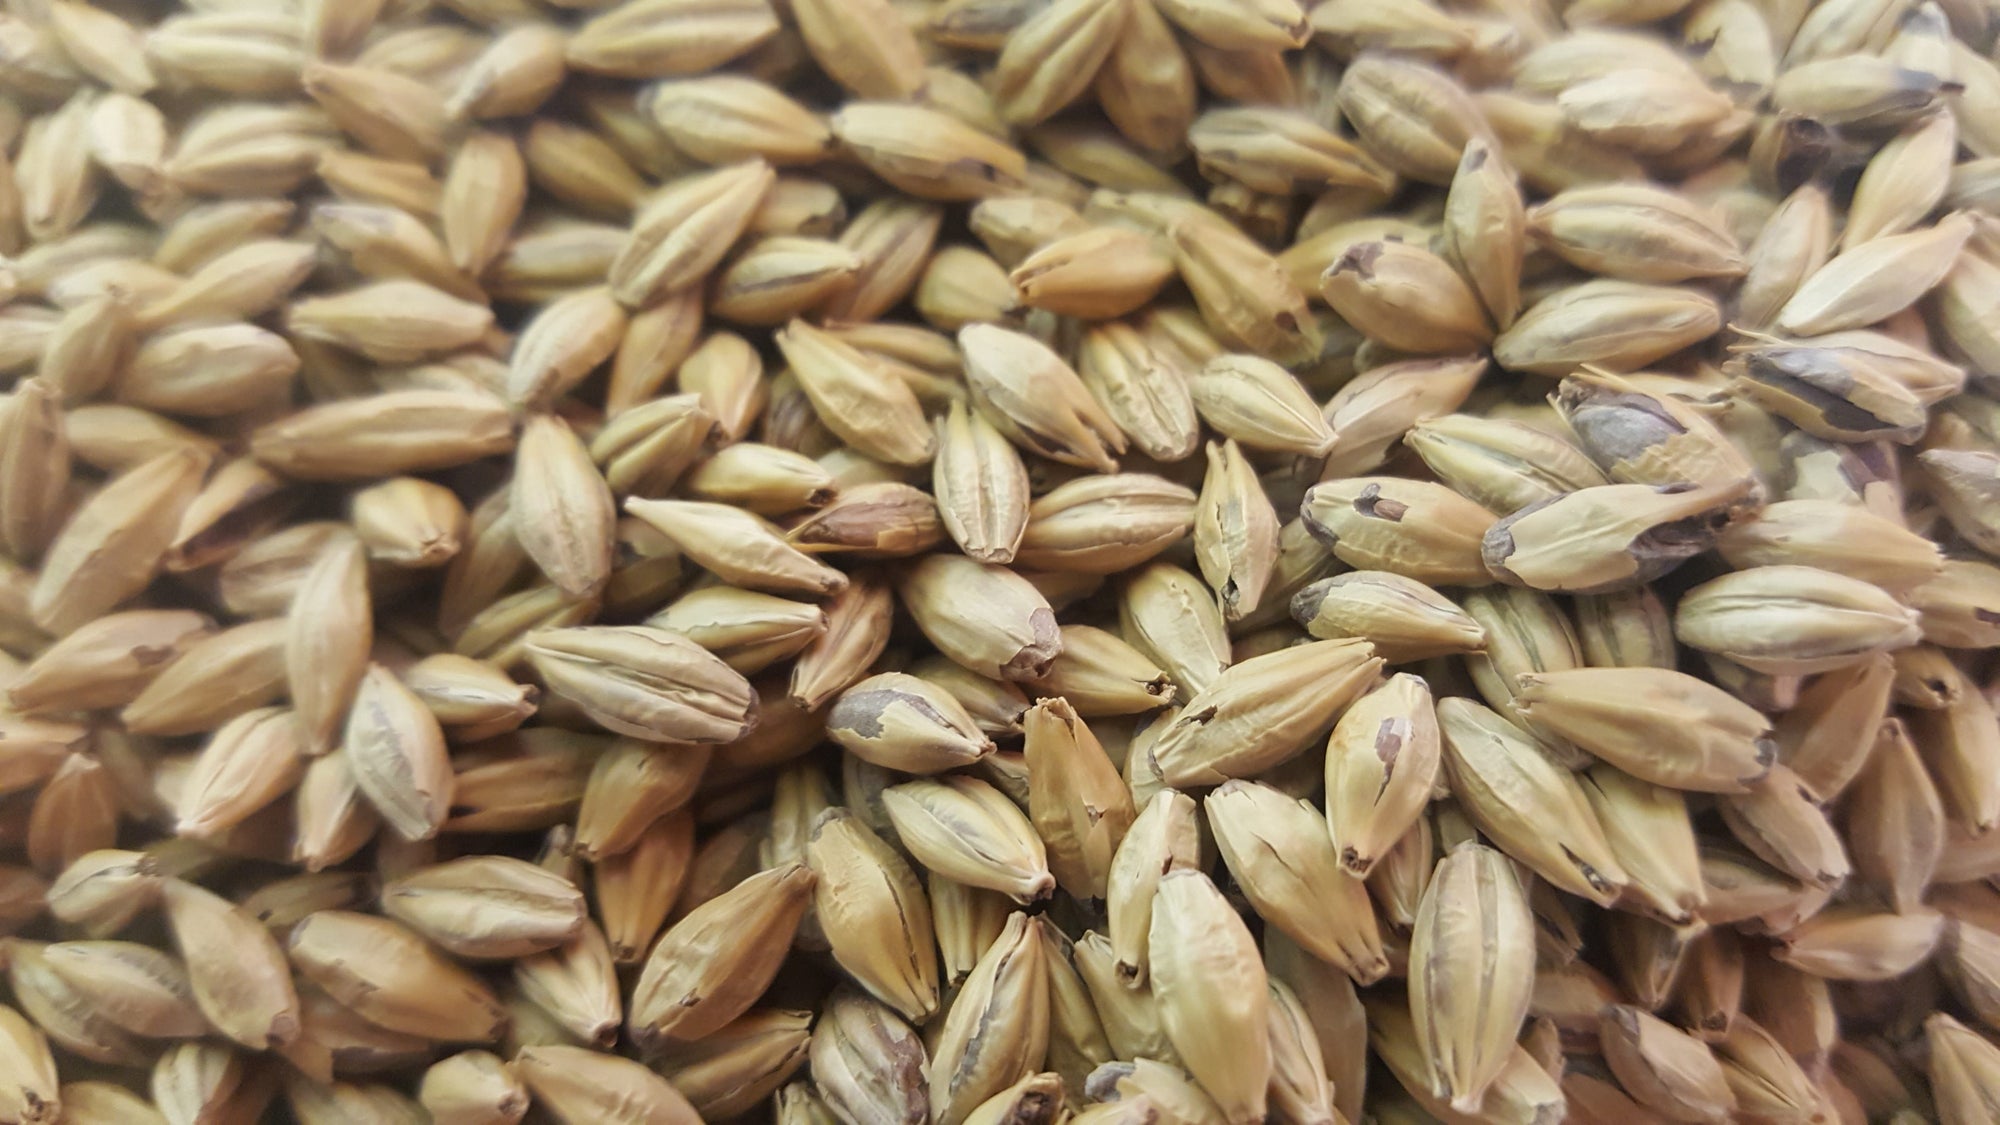 Gladfield Biscuit Malt - All Things Fermented | Home Brew Shop NZ | Supplies | Equipment